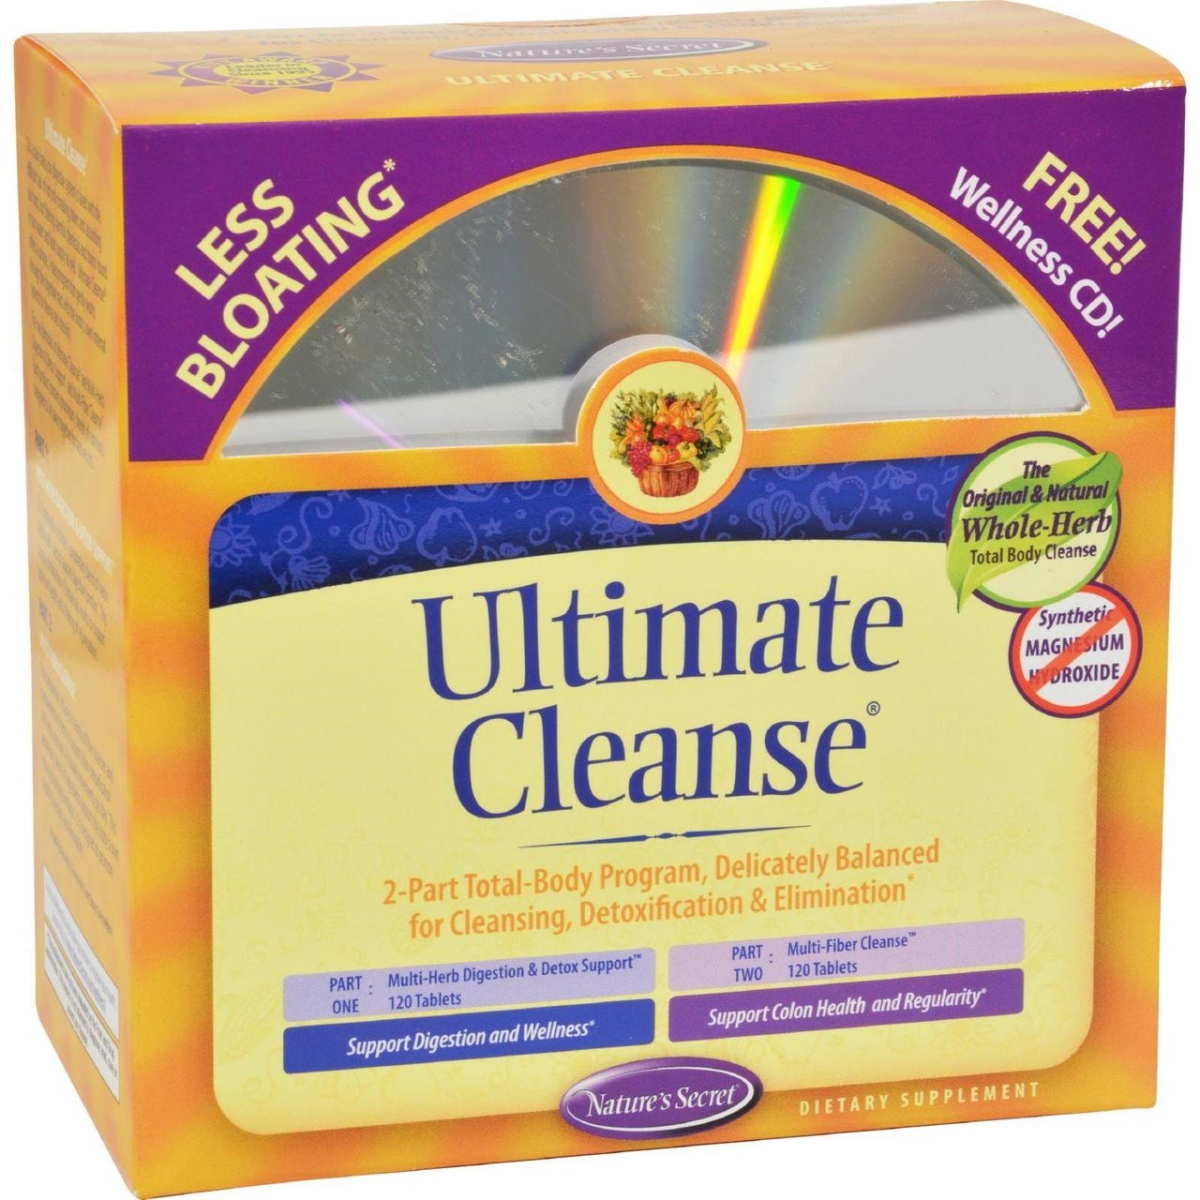 Hg0944785 Ultimate Cleanse Kit - 120 Tablets